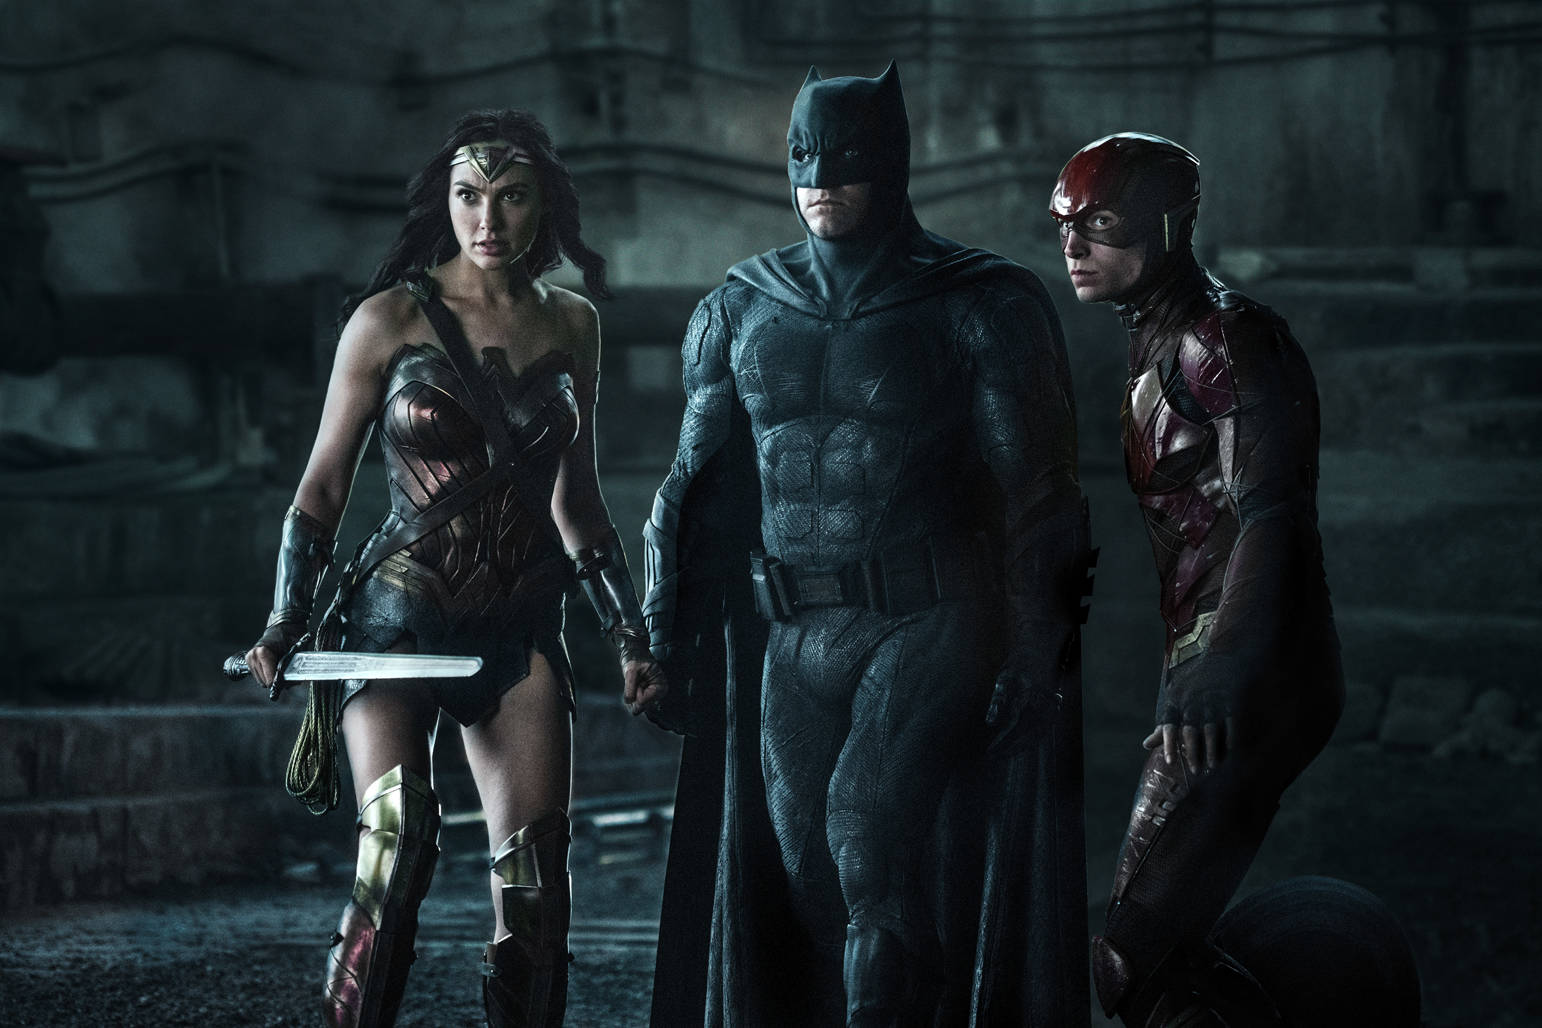 This image released by Warner Bros. Pictures shows Gal Gadot, from left, Ben Affleck and Ezra Miller in a scene from “Justice League.” (Clay Enos/Warner Bros. Entertainment Inc. via AP)